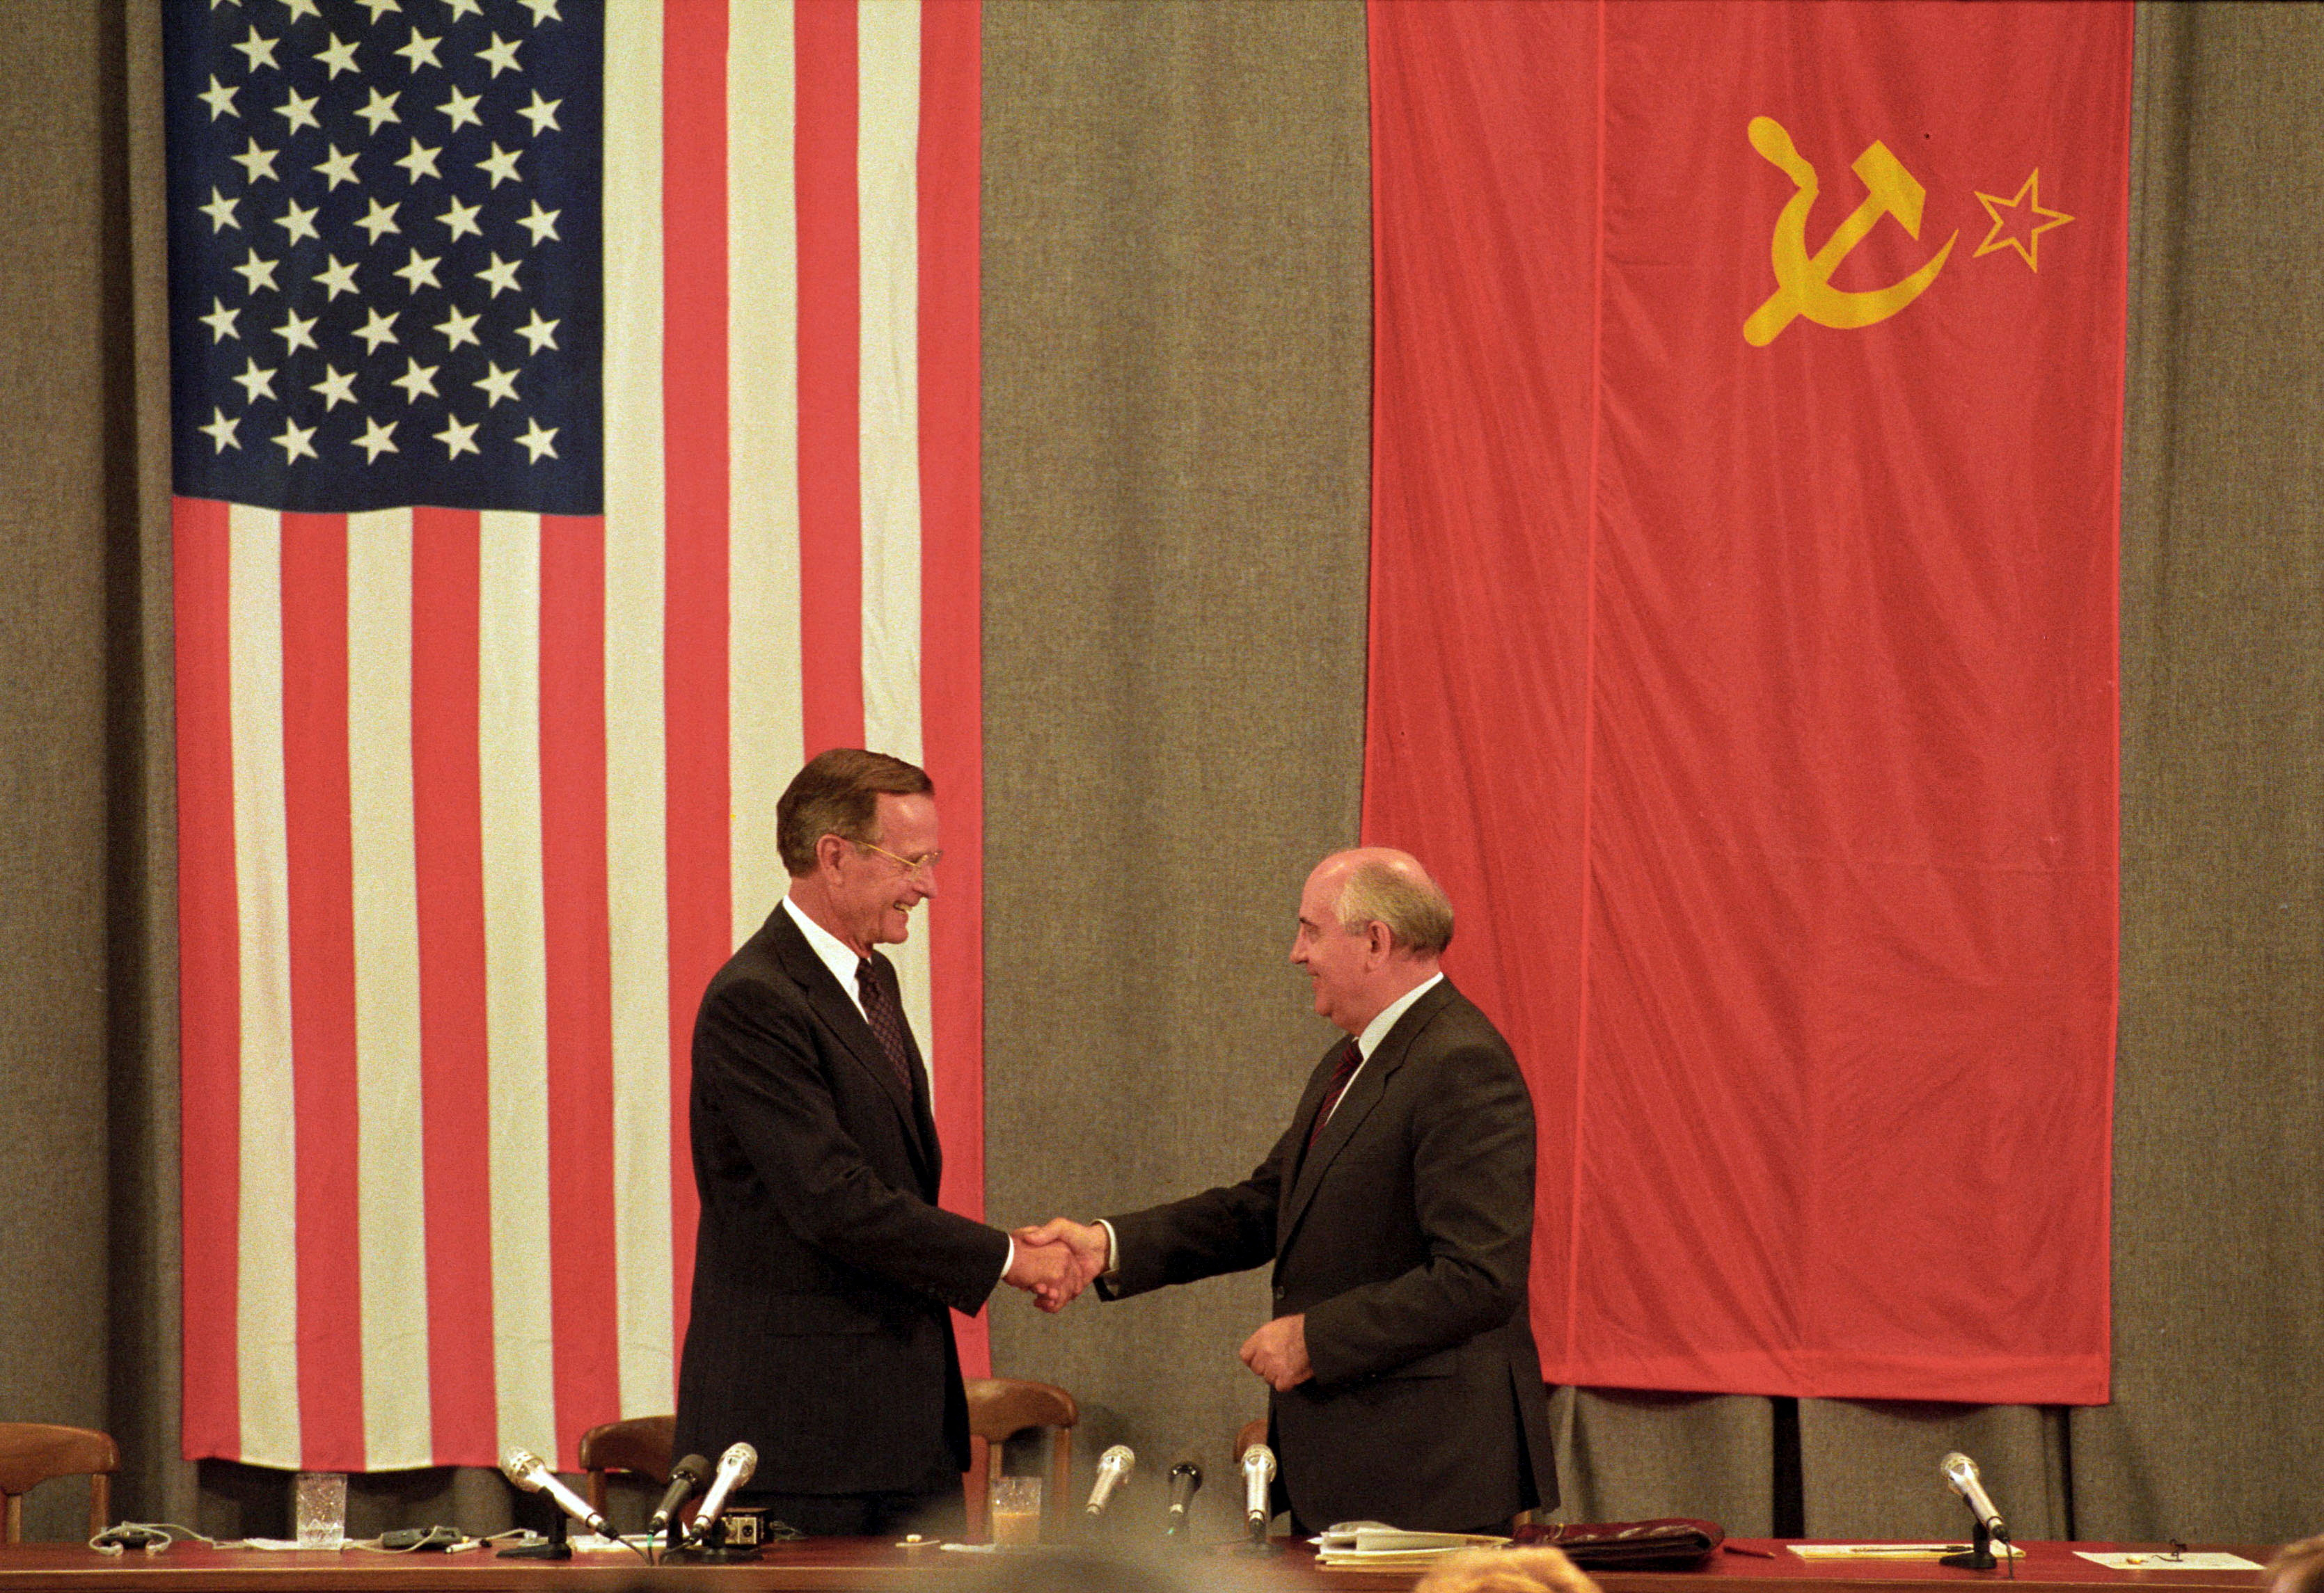 U.S. President George H. W. Bush (L) and Soviet President Mikhail Gorbachev shake hands in front of U.S. and Soviet flags at the end of the press conference in Moscow